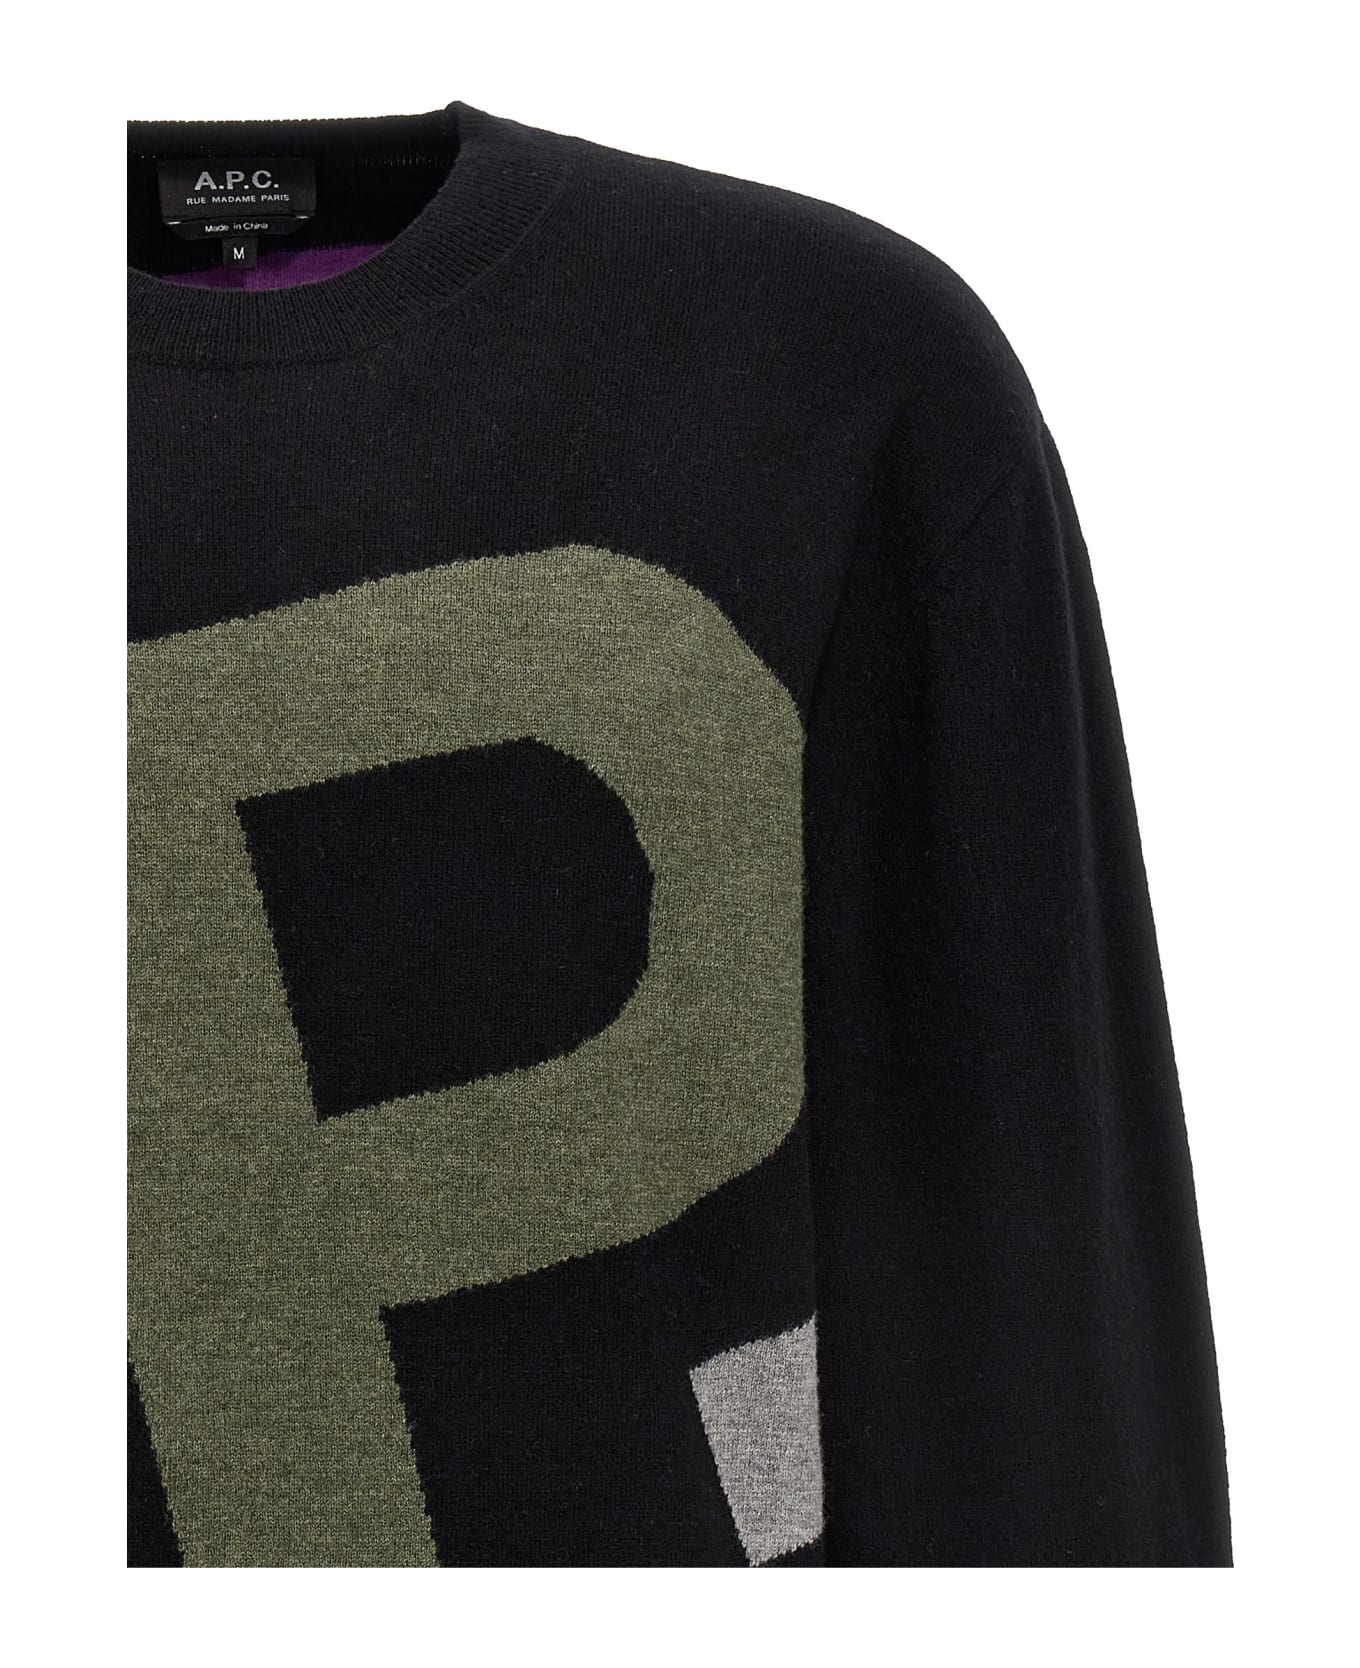 A.P.C. Logo All Over Sweater - BLACK